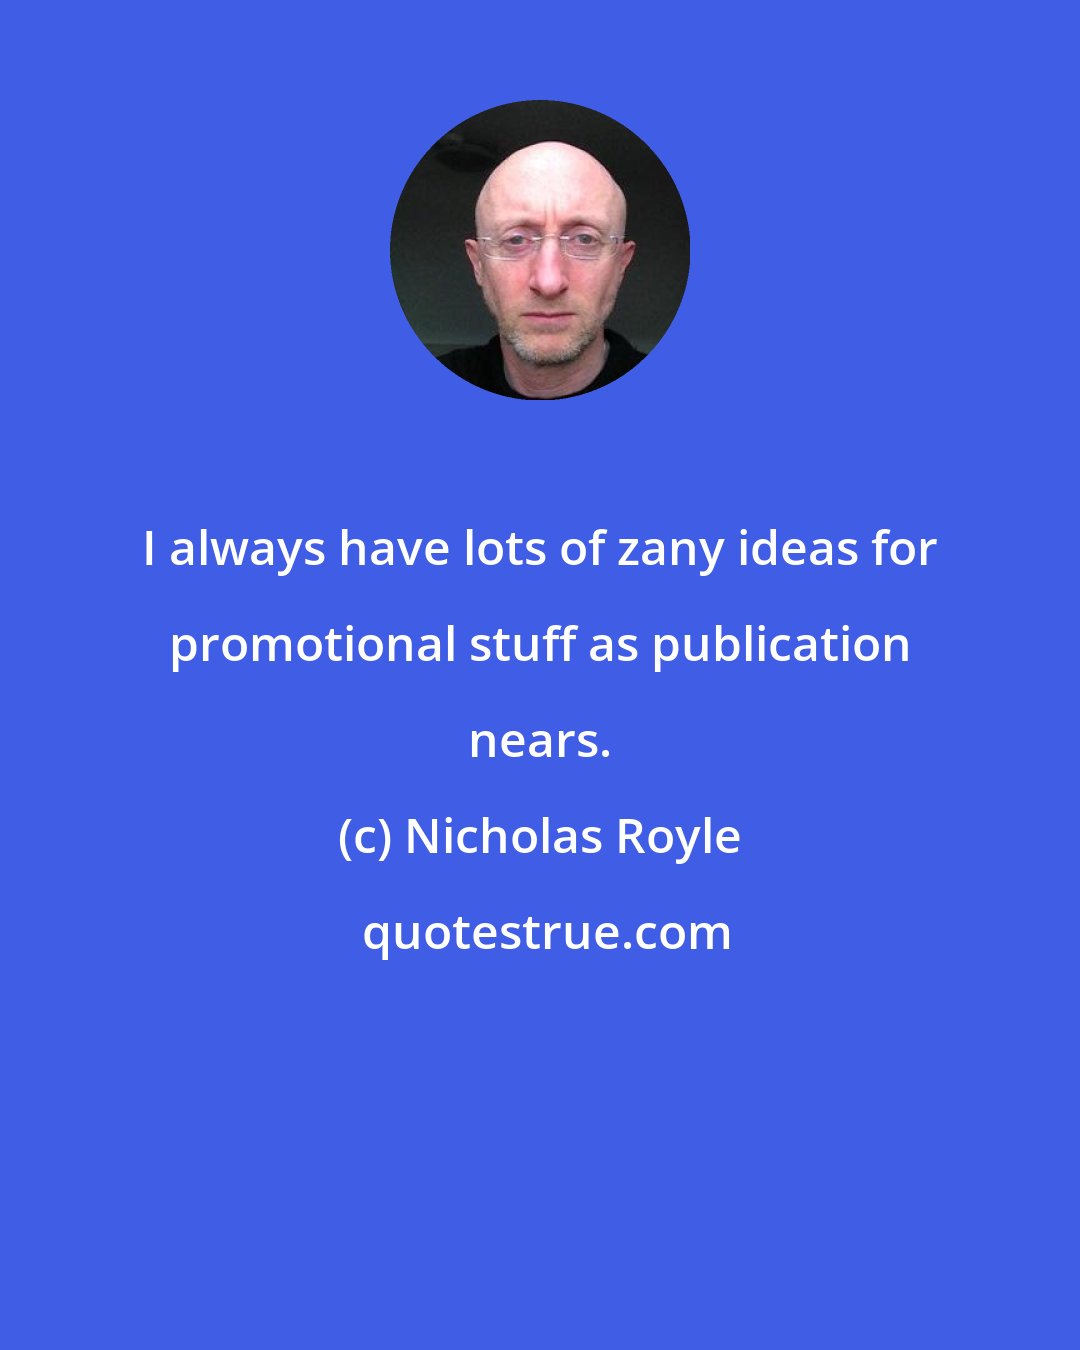 Nicholas Royle: I always have lots of zany ideas for promotional stuff as publication nears.